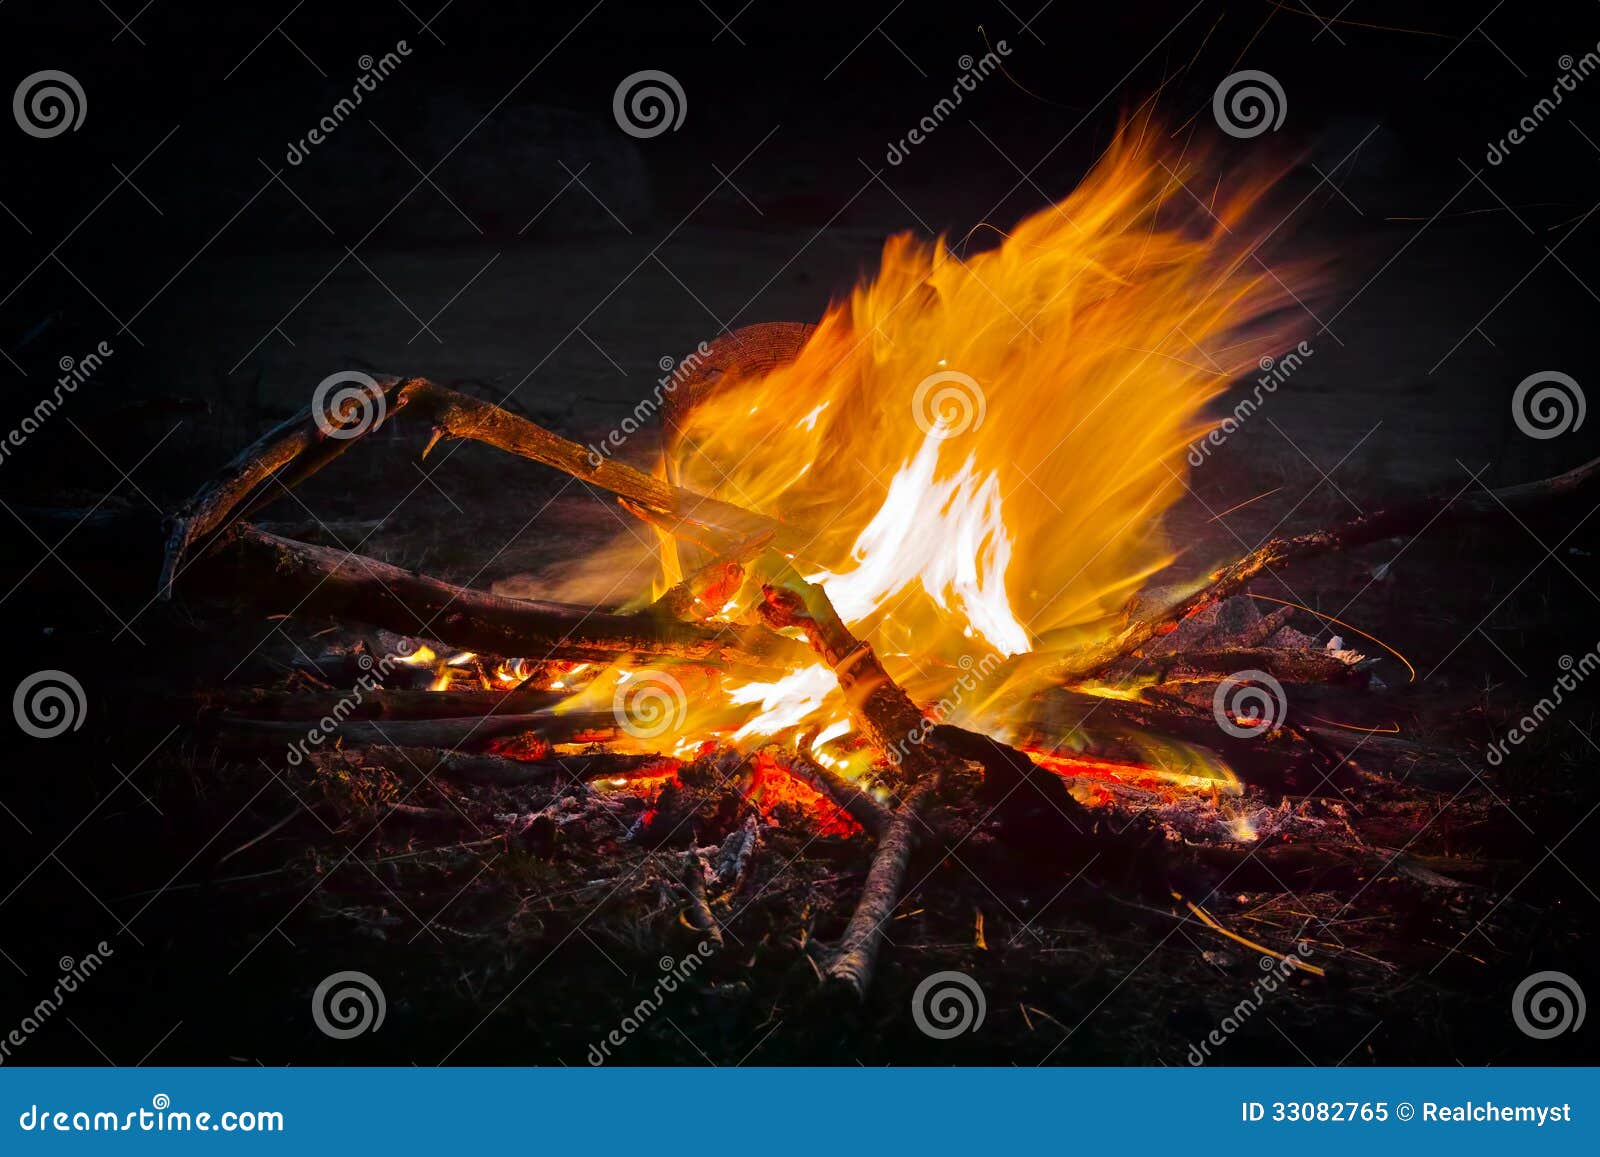 Camping fire stock image. Image of heat, fireplace, nature - 33082765